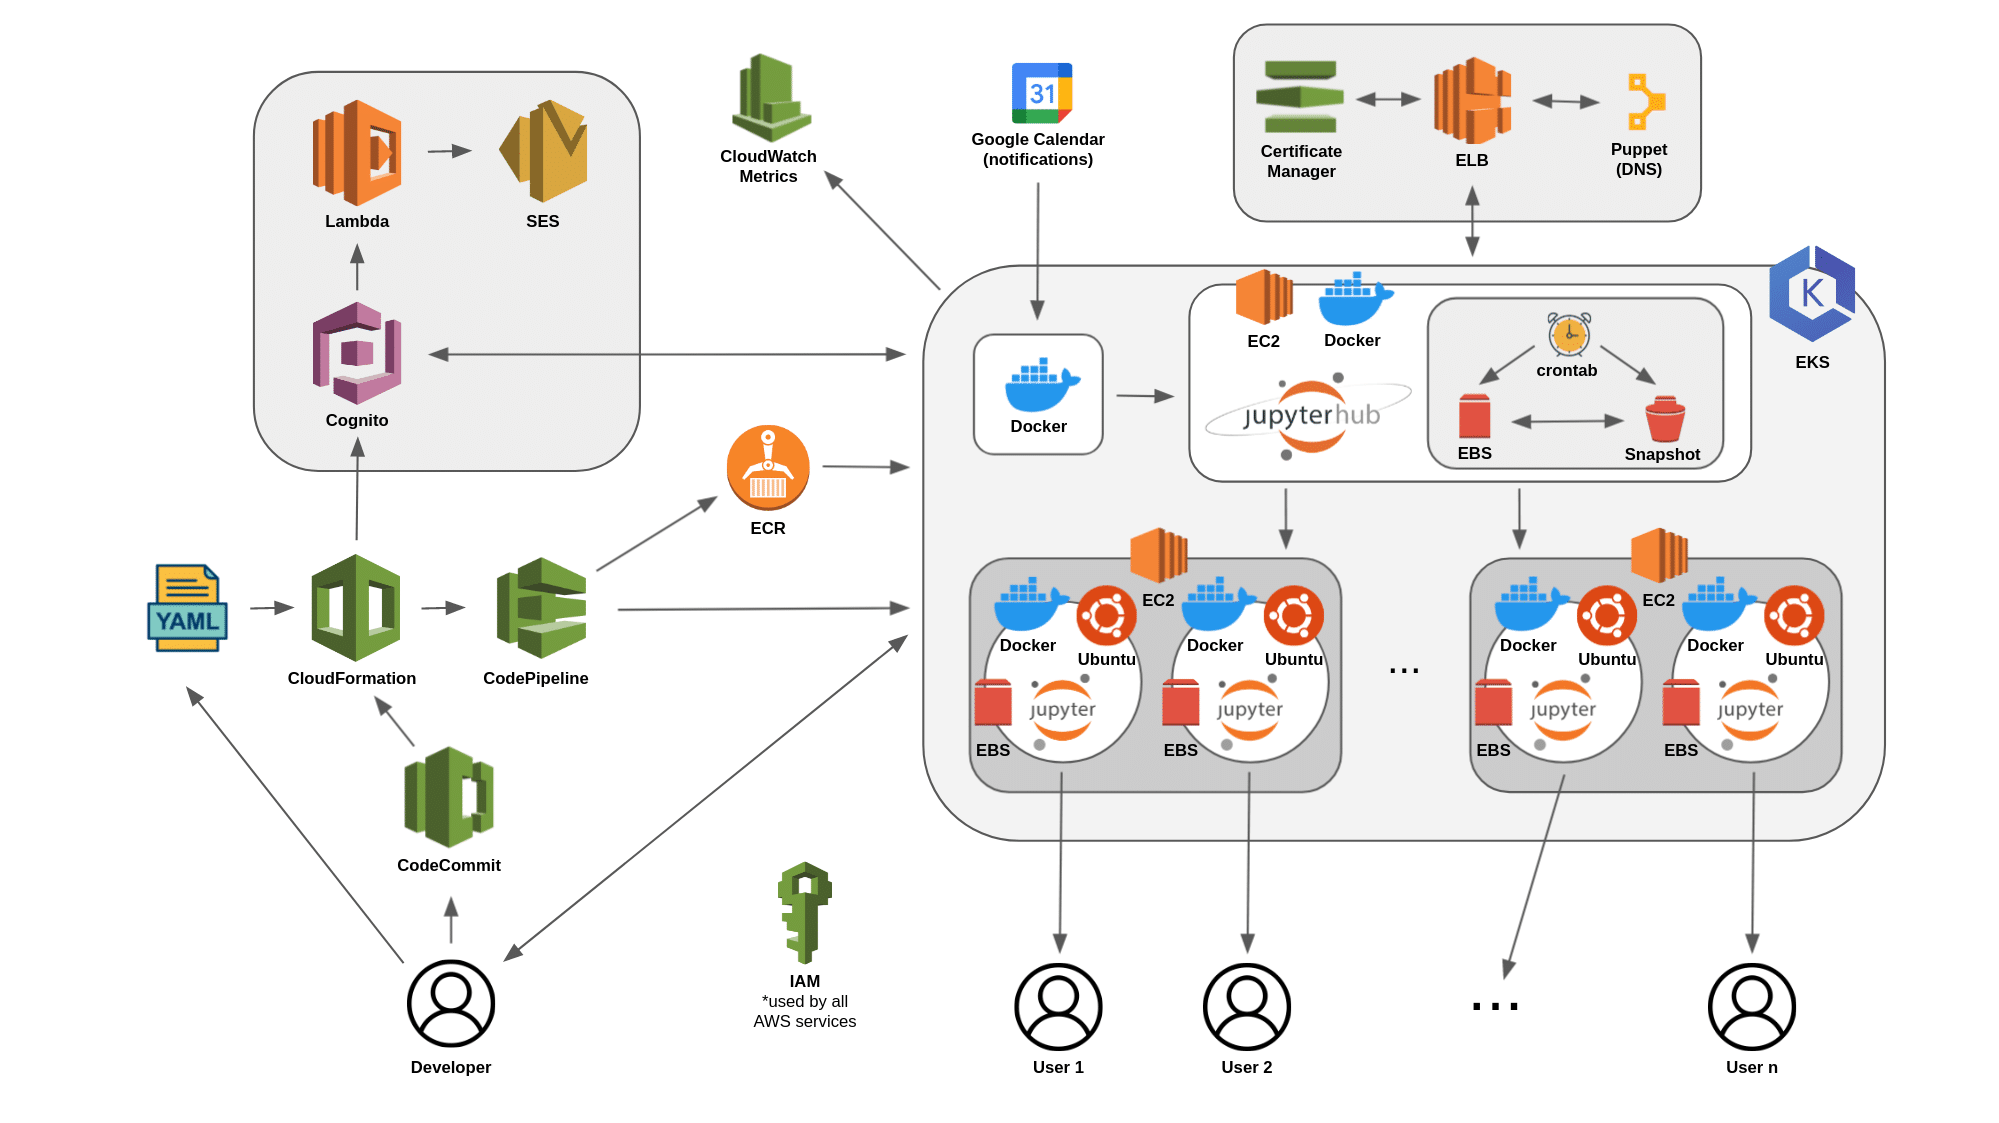 OpenScienceLab schematic showing the inter-connectivity between the JupiterHub Cloud, the users and the tools and services connecting them to process SAR data in the cloud.